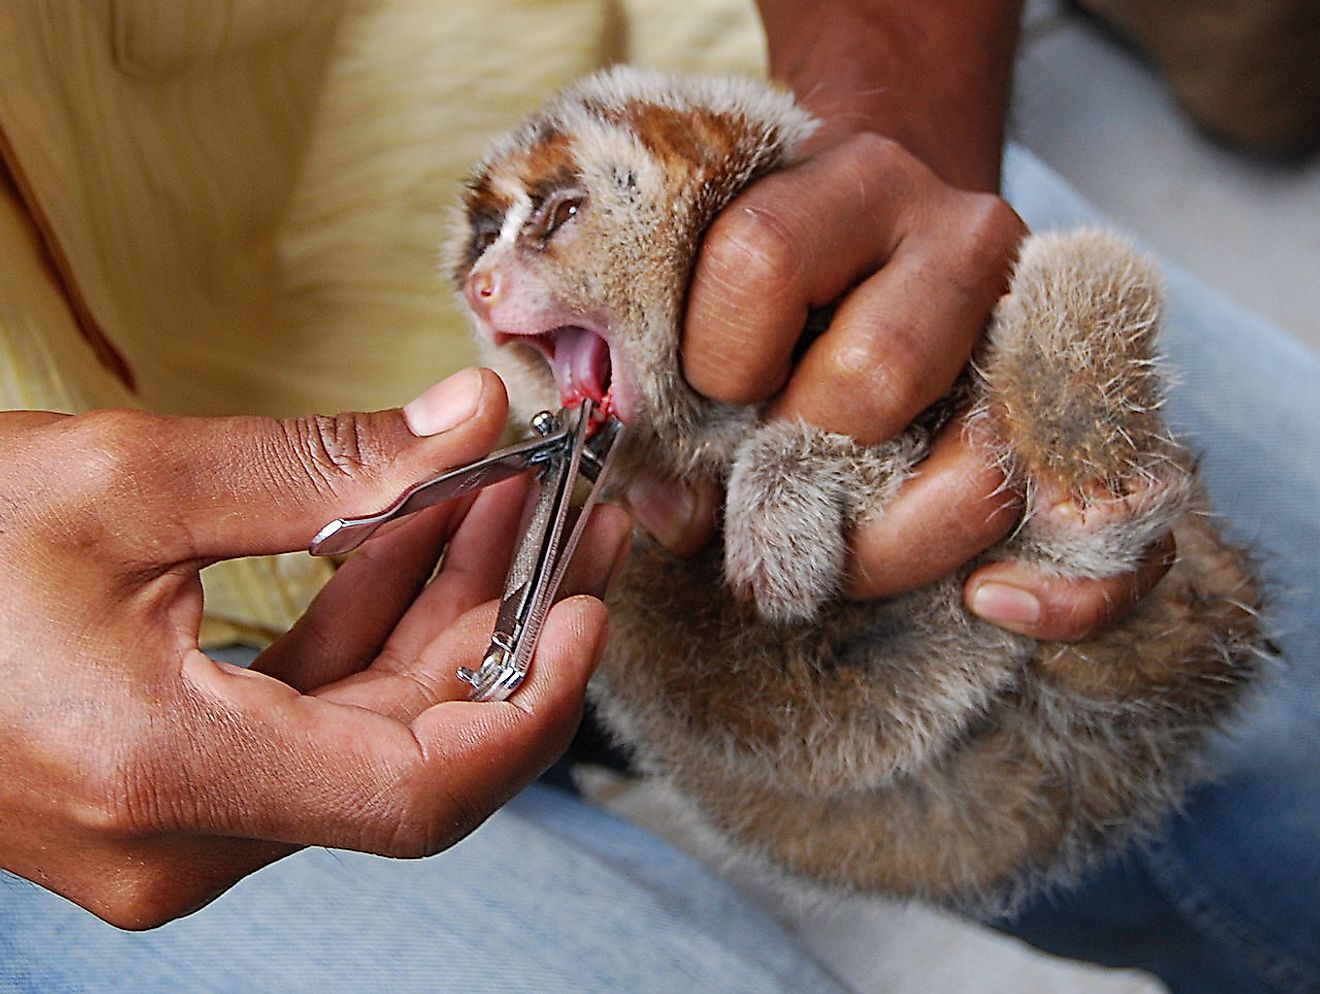 Slow lorises have their front teeth cut or pulled before being sold as pets, a practice that often causes infection and death. Image credit: International Animal Rescue (IAR)/Wikimedia.org